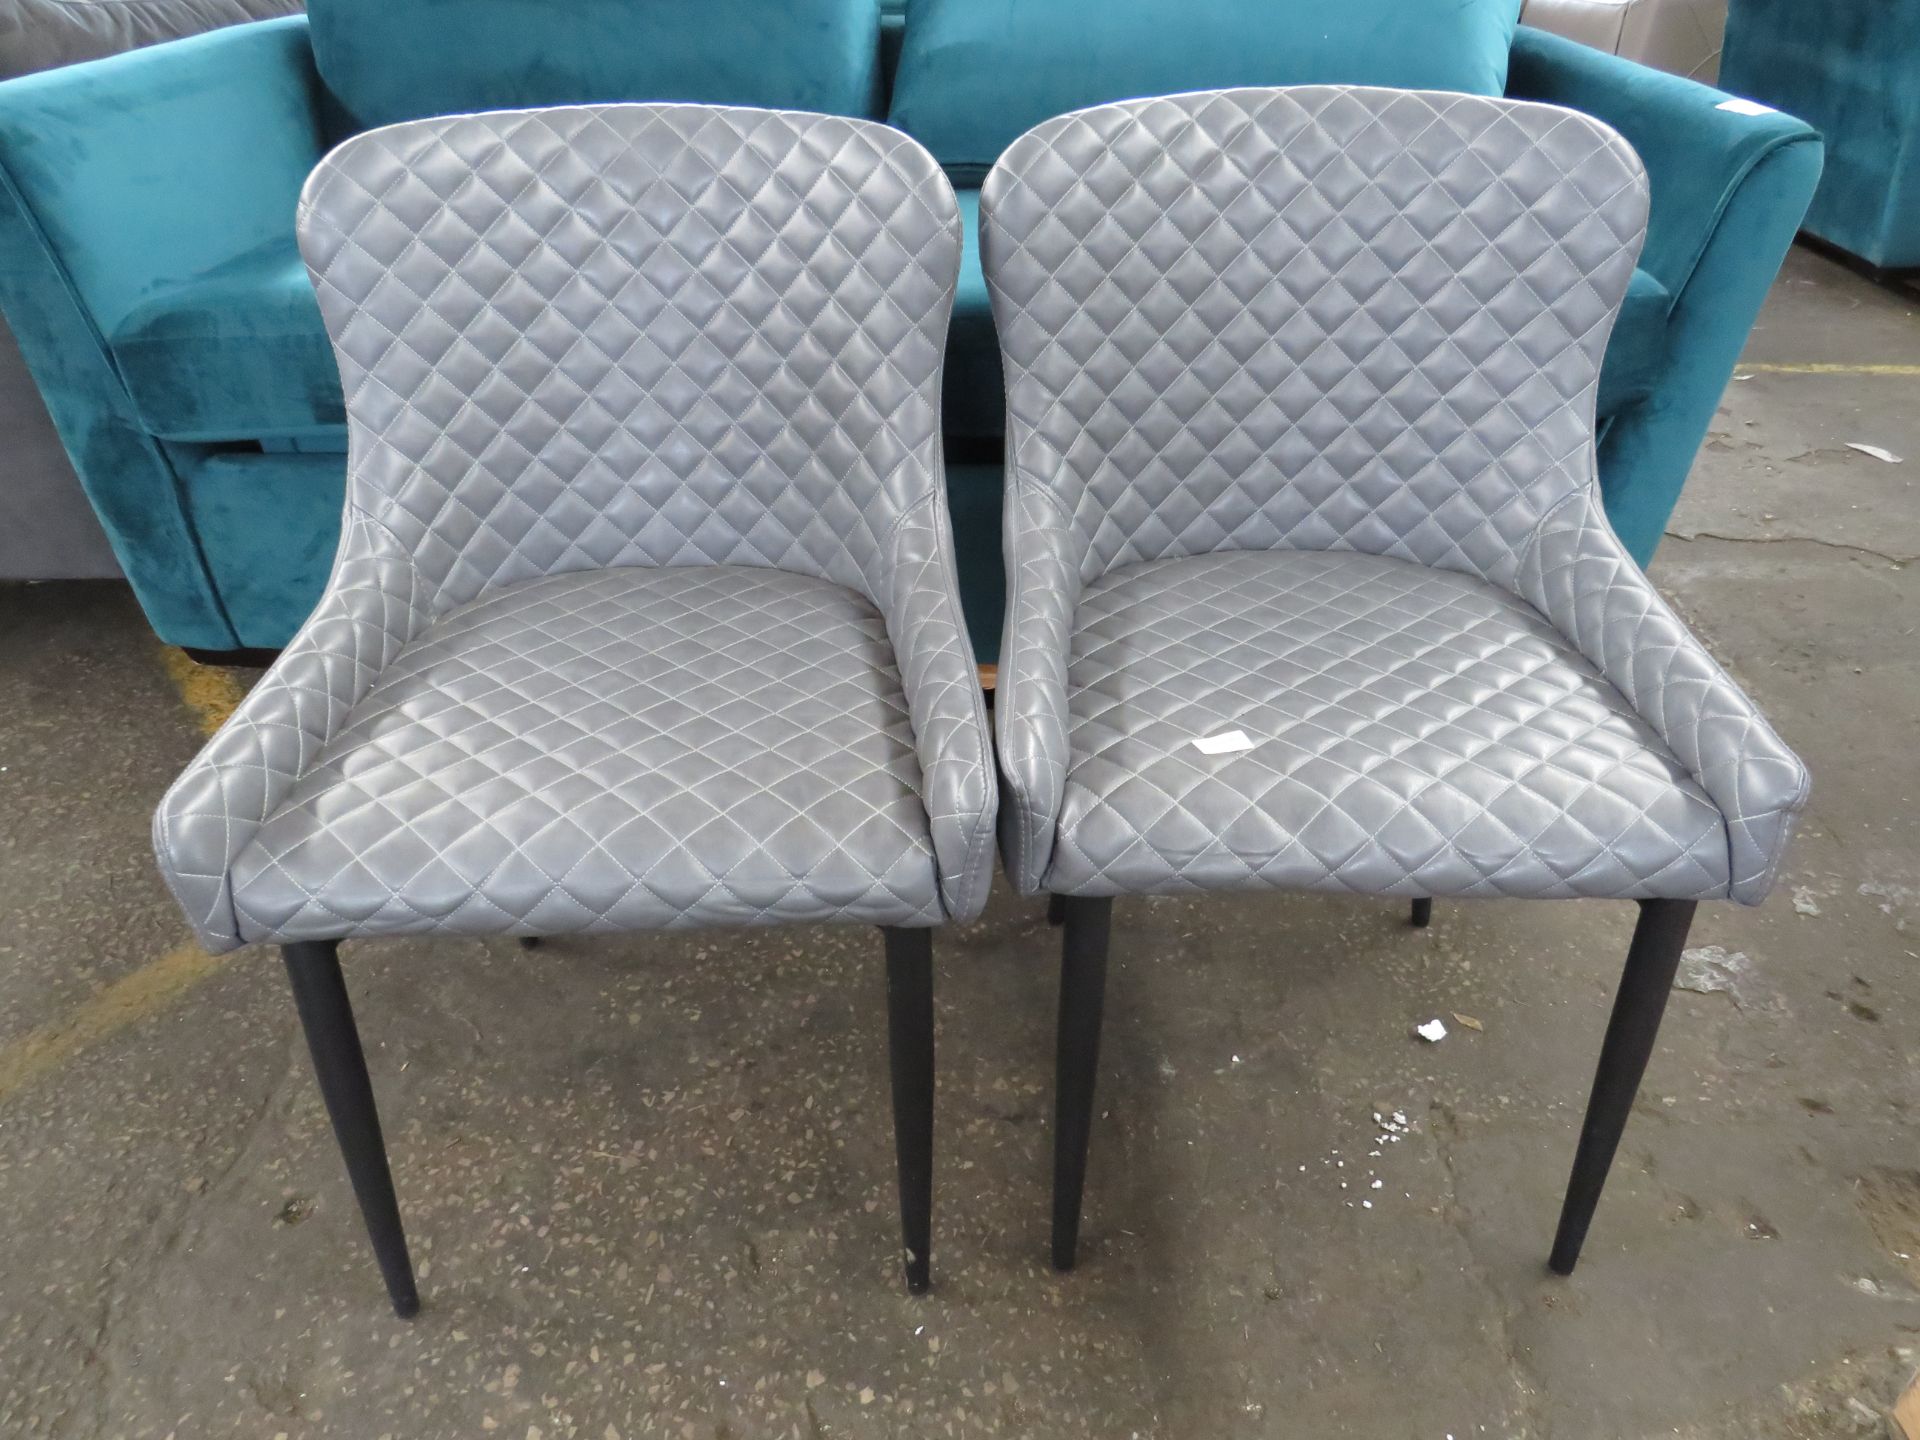 Pair of Cezanne Grey Faux Leather Dining Chairs - Good Condition - RRP £325